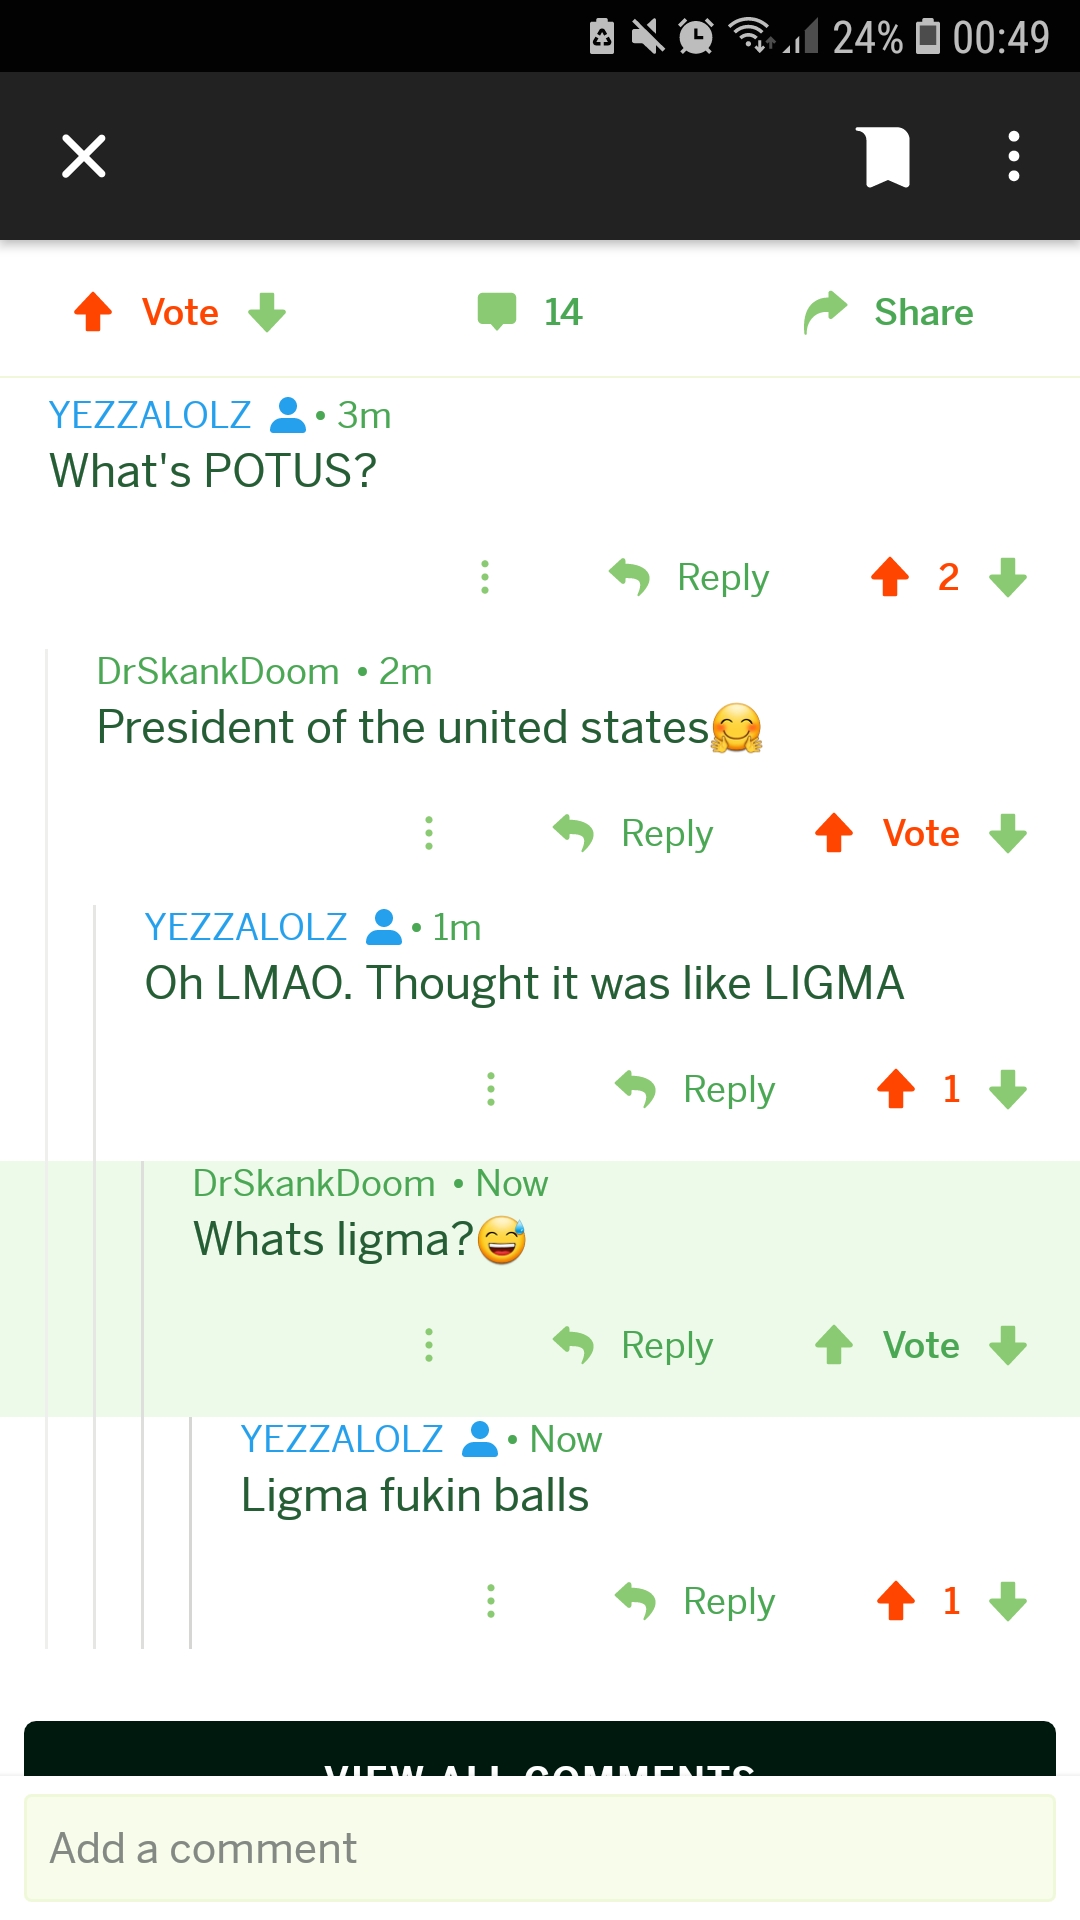 screenshot - Axop 24% 4 Vote 14 Yezzalolz 3m What's Potus? 4 2 DrSkankDoom 2m President of the united states Vote Yezzalolz 1m Oh Lmao. Thought it was Ligma > i DrSkankDoom Now Whats ligma? Vote Yezzalolz . Now Ligma fukin balls 1 ? Add a comment